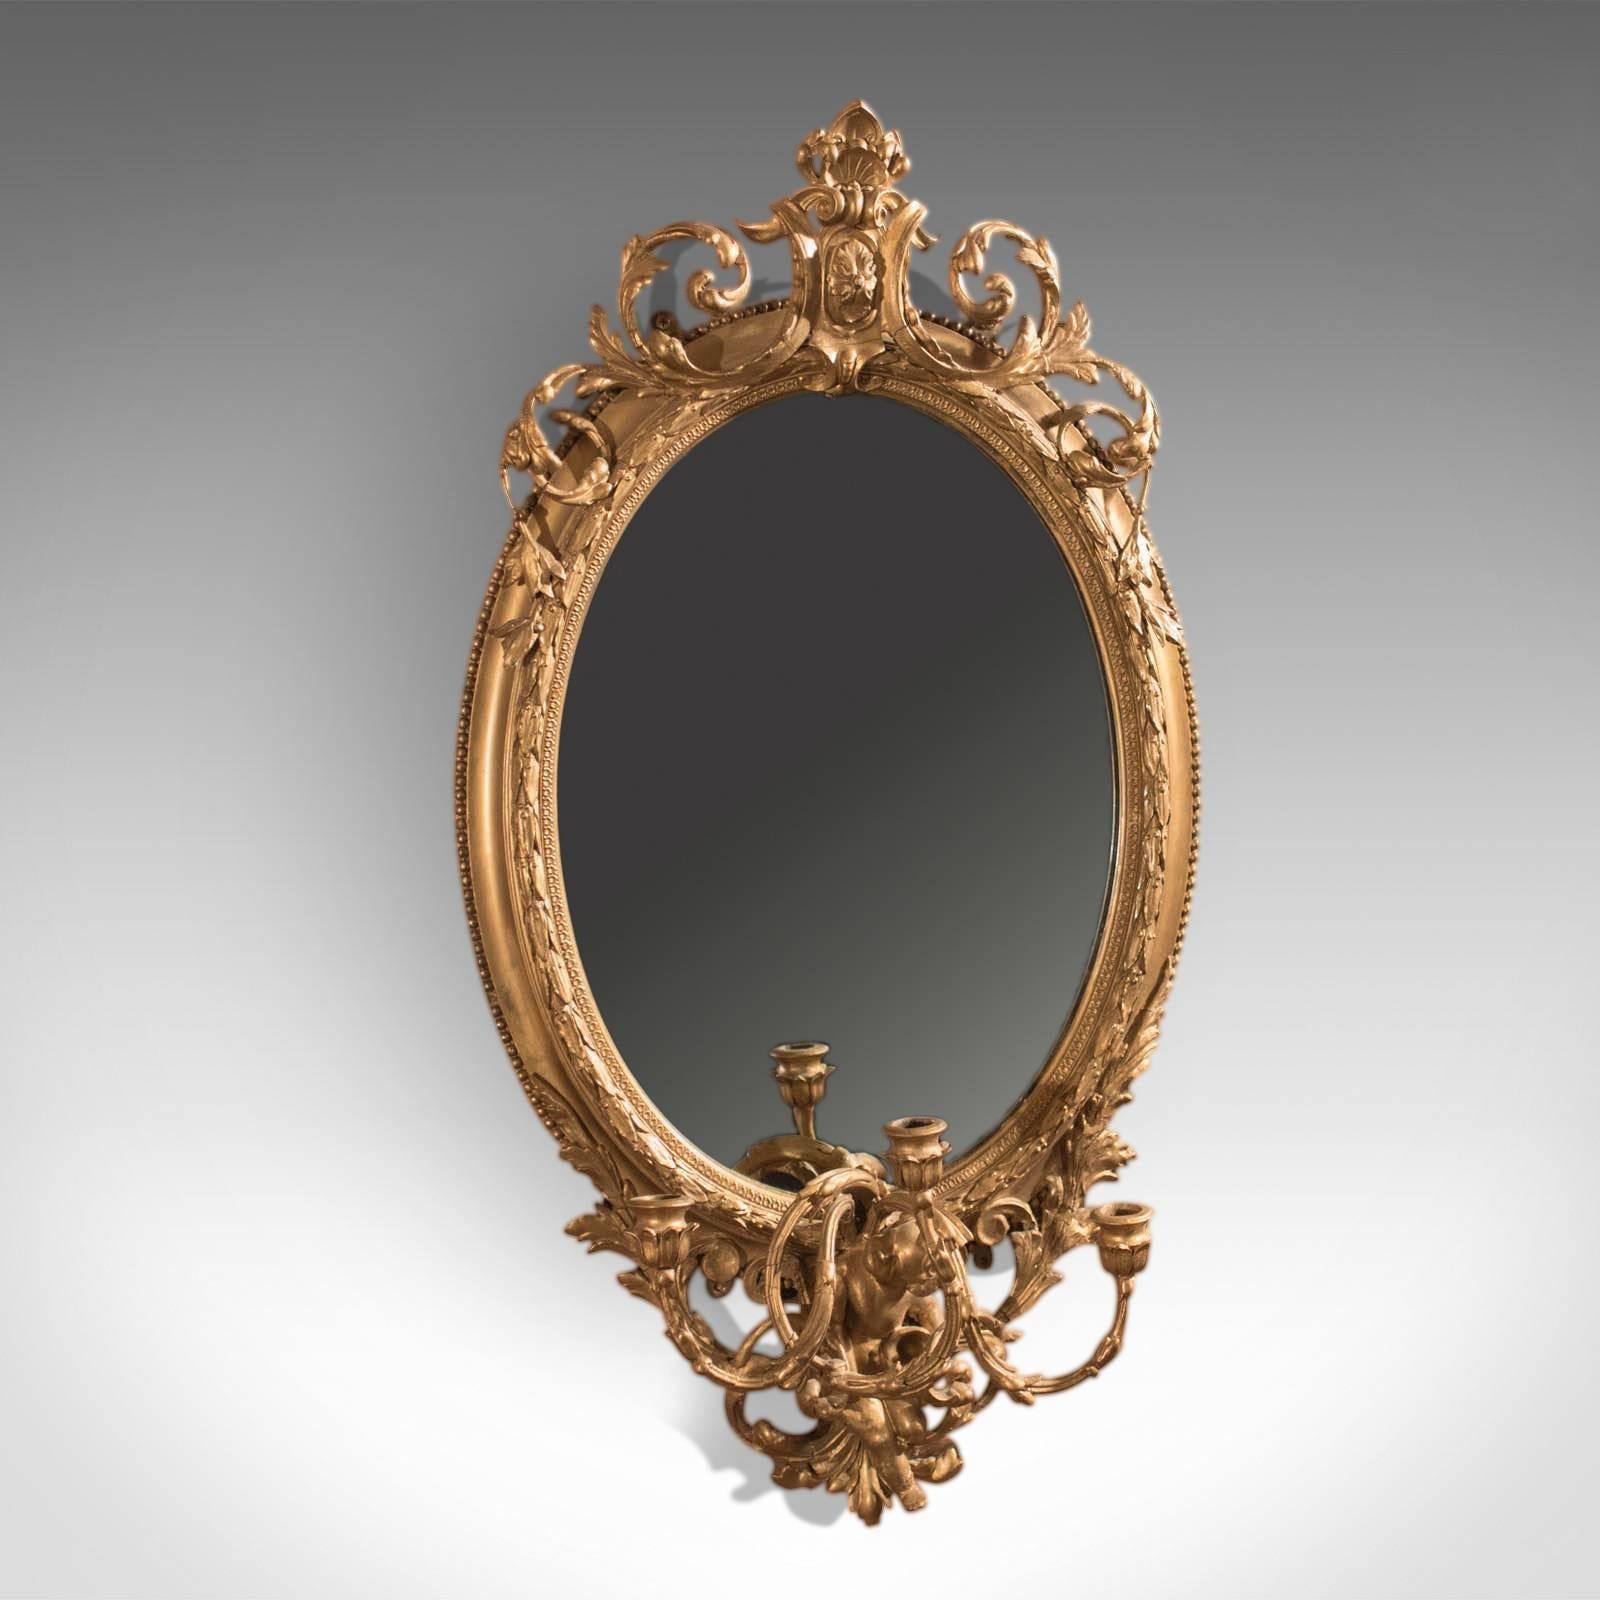 This is an antique girandole mirror dating to the turn of the 18th and 19th centuries, circa 1800.

A super example, this wall mirror is framed in giltwood and gesso, the moulding around the later mirror plate displaying a garland of foliate